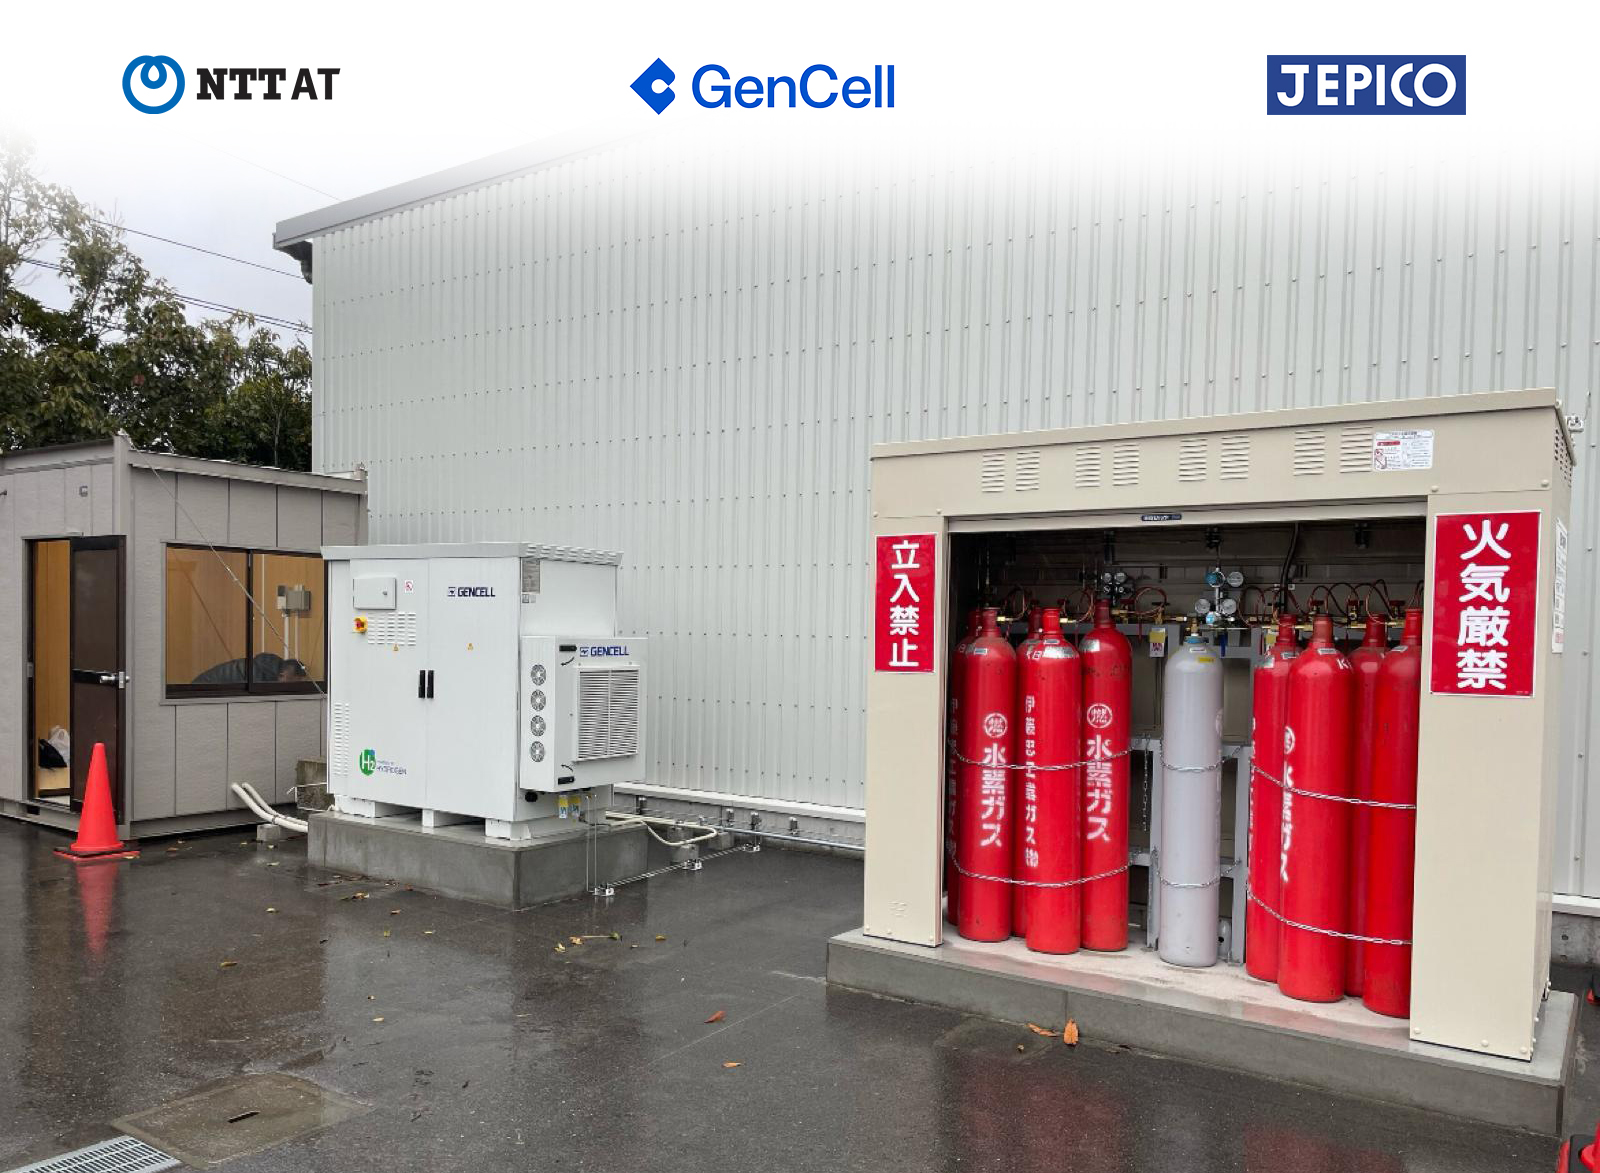 NTT and Jepico deploy GenCell BOX in Japan